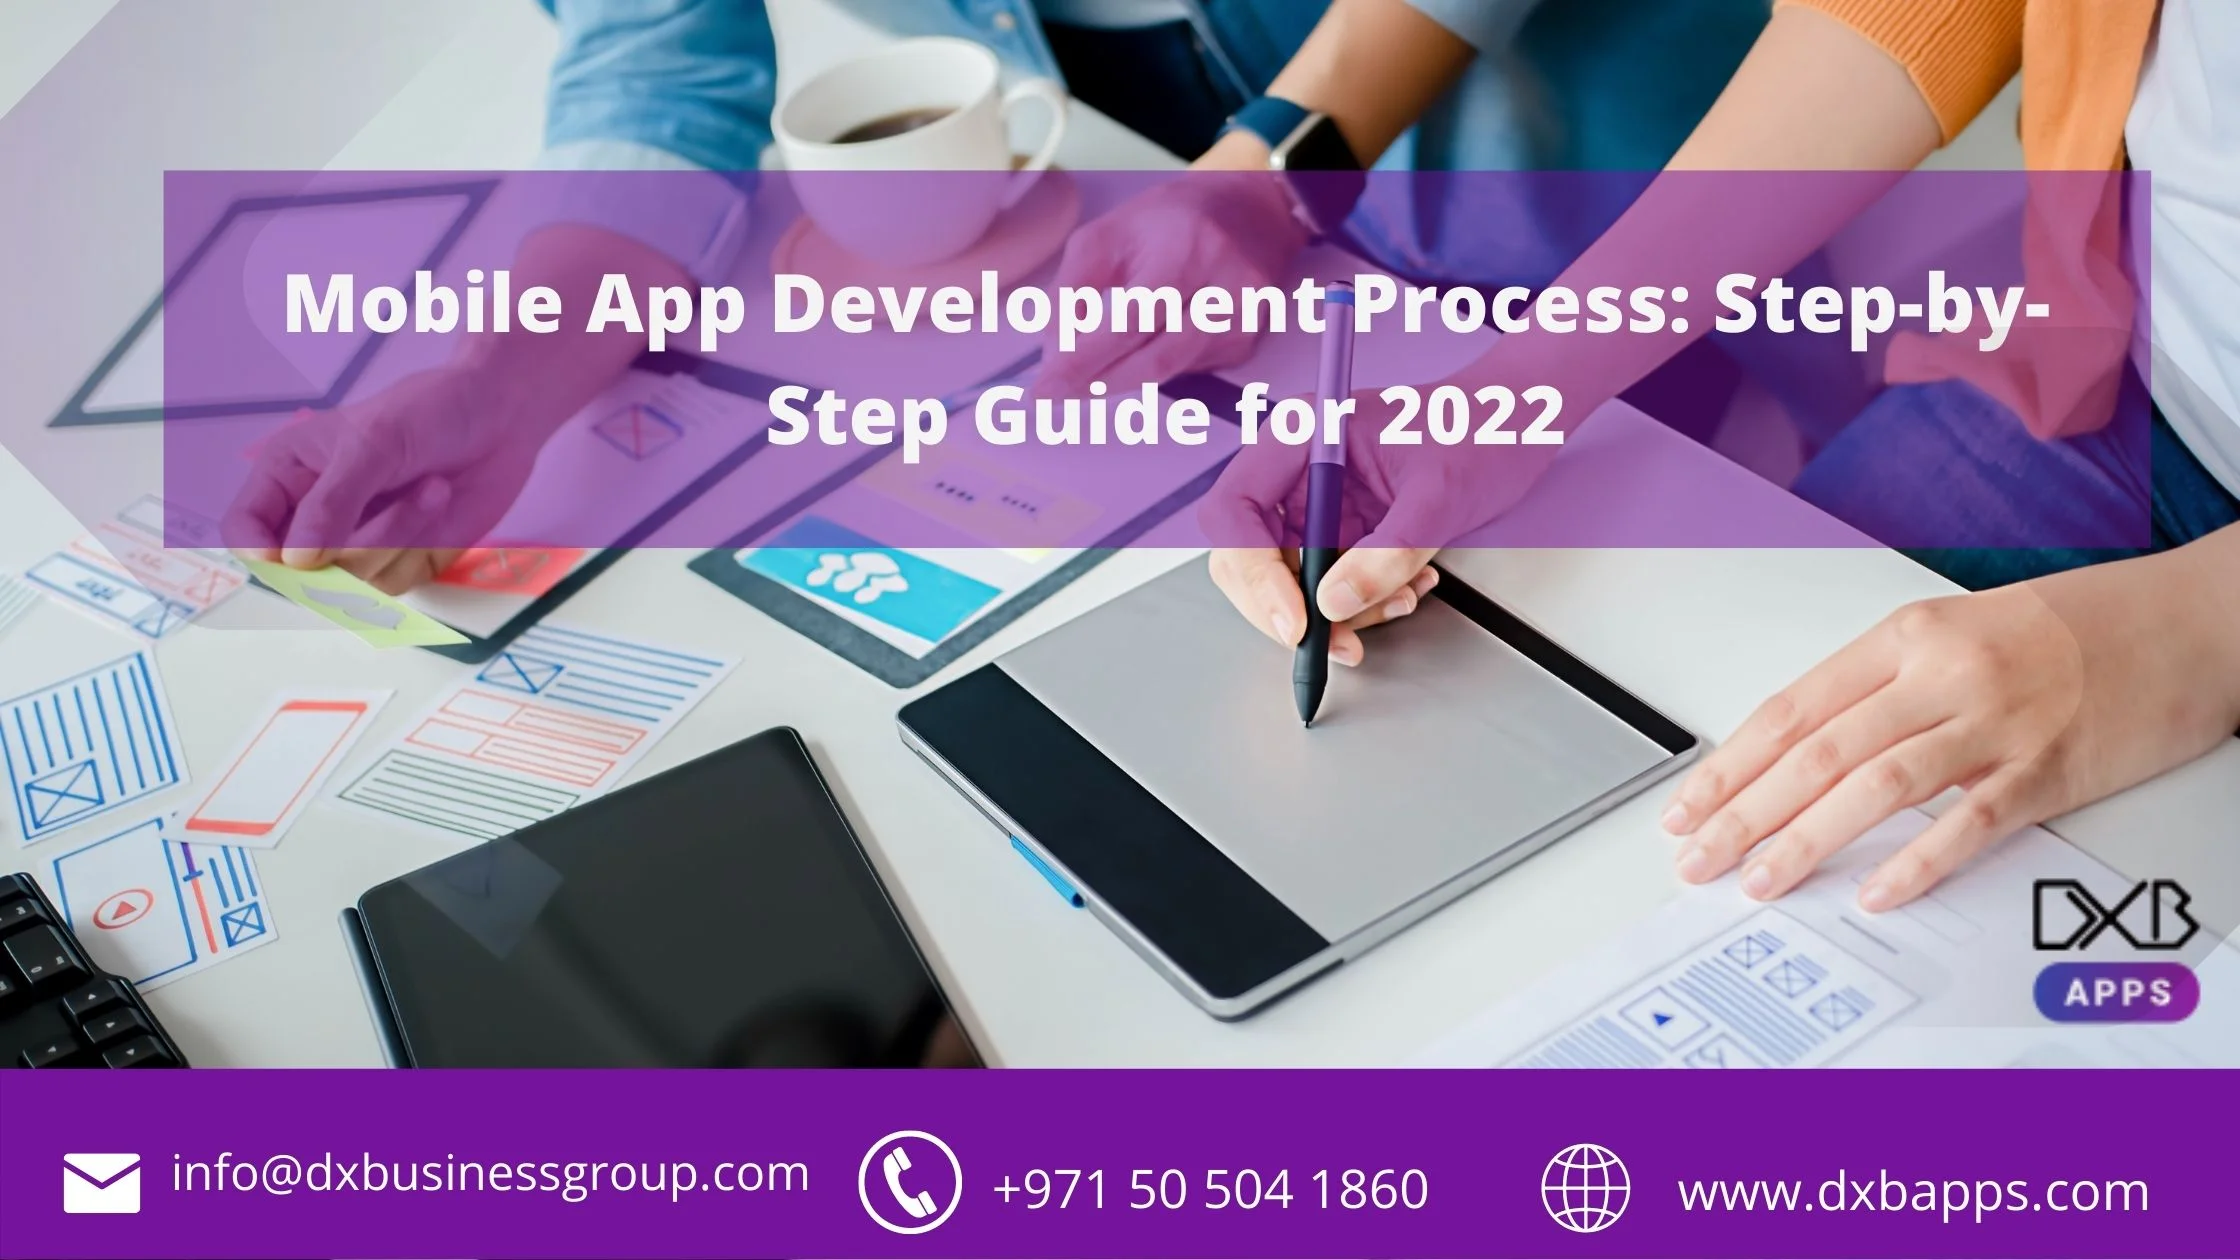 Mobile App Development Process: Step-by-Step Guide for 2022